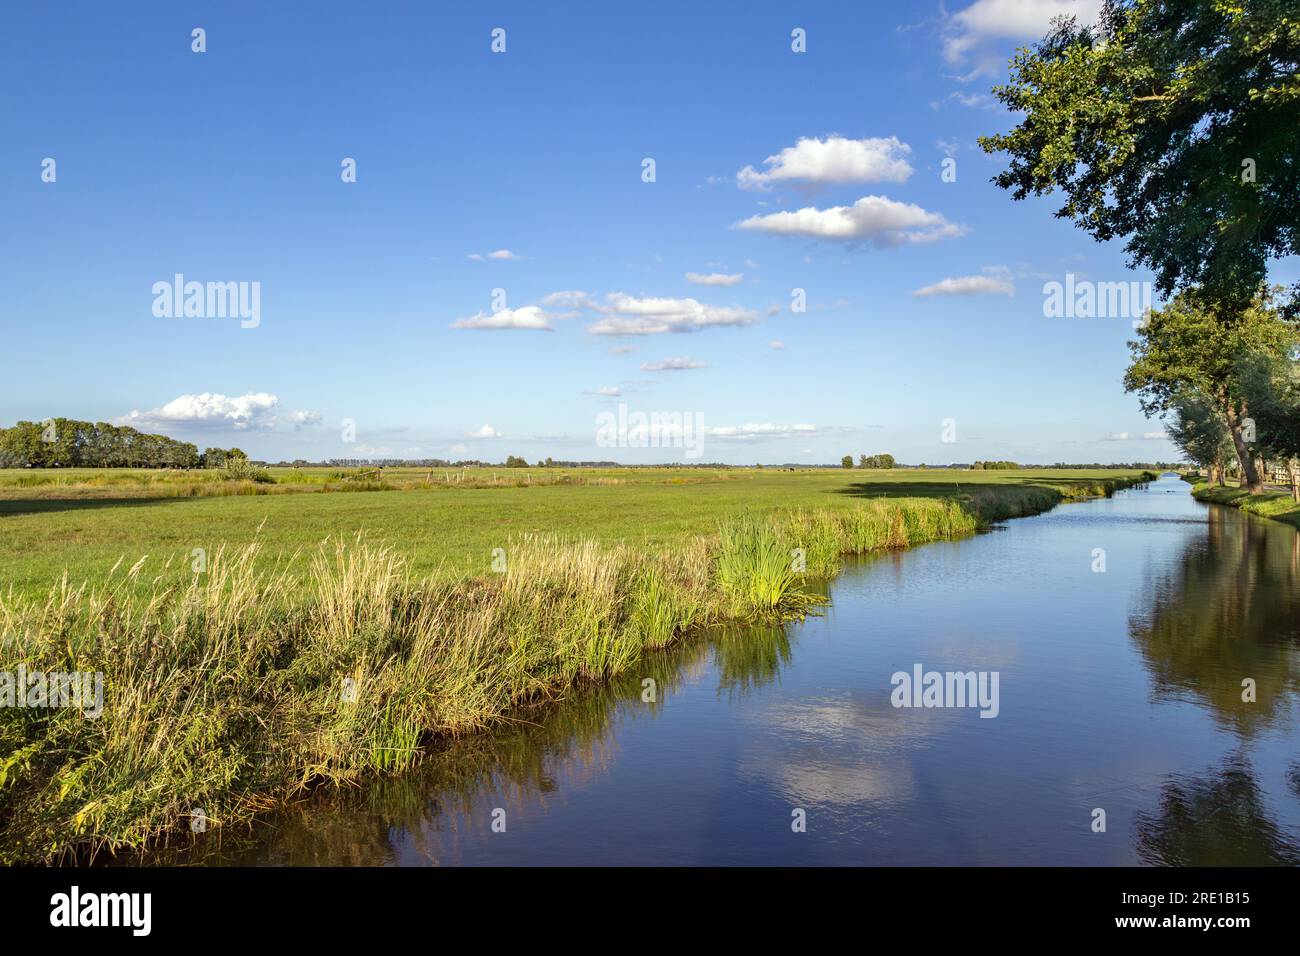 Dutch polder landscape with canal Stock Photo